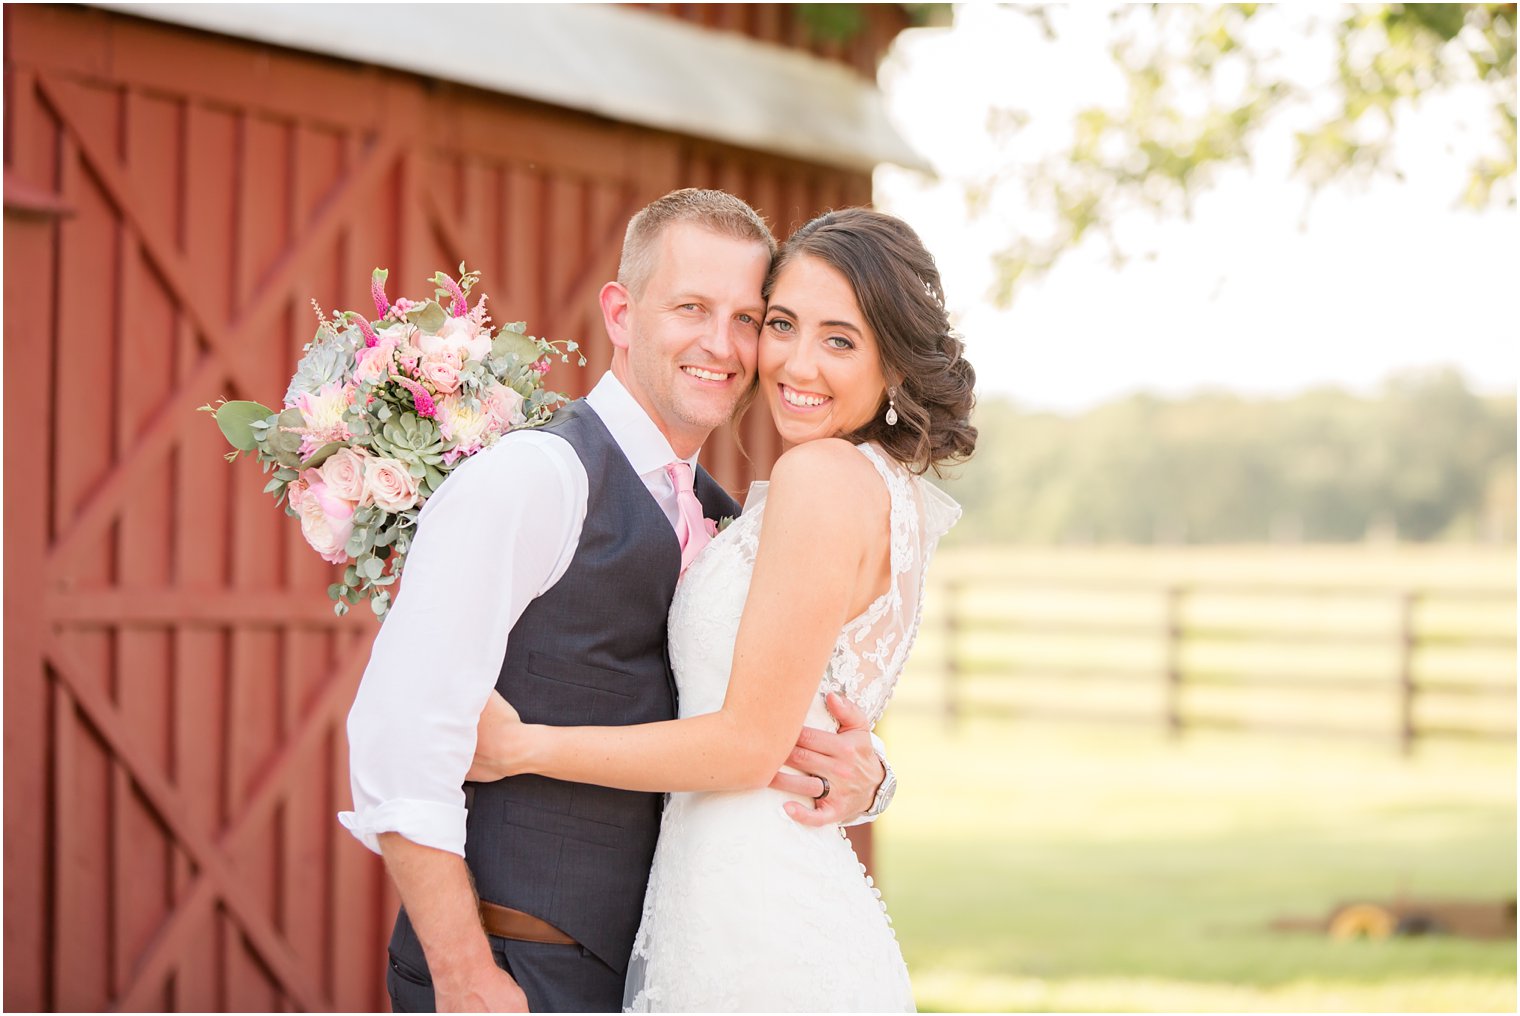 Candid bride and groom photos at Stone Rows Farm